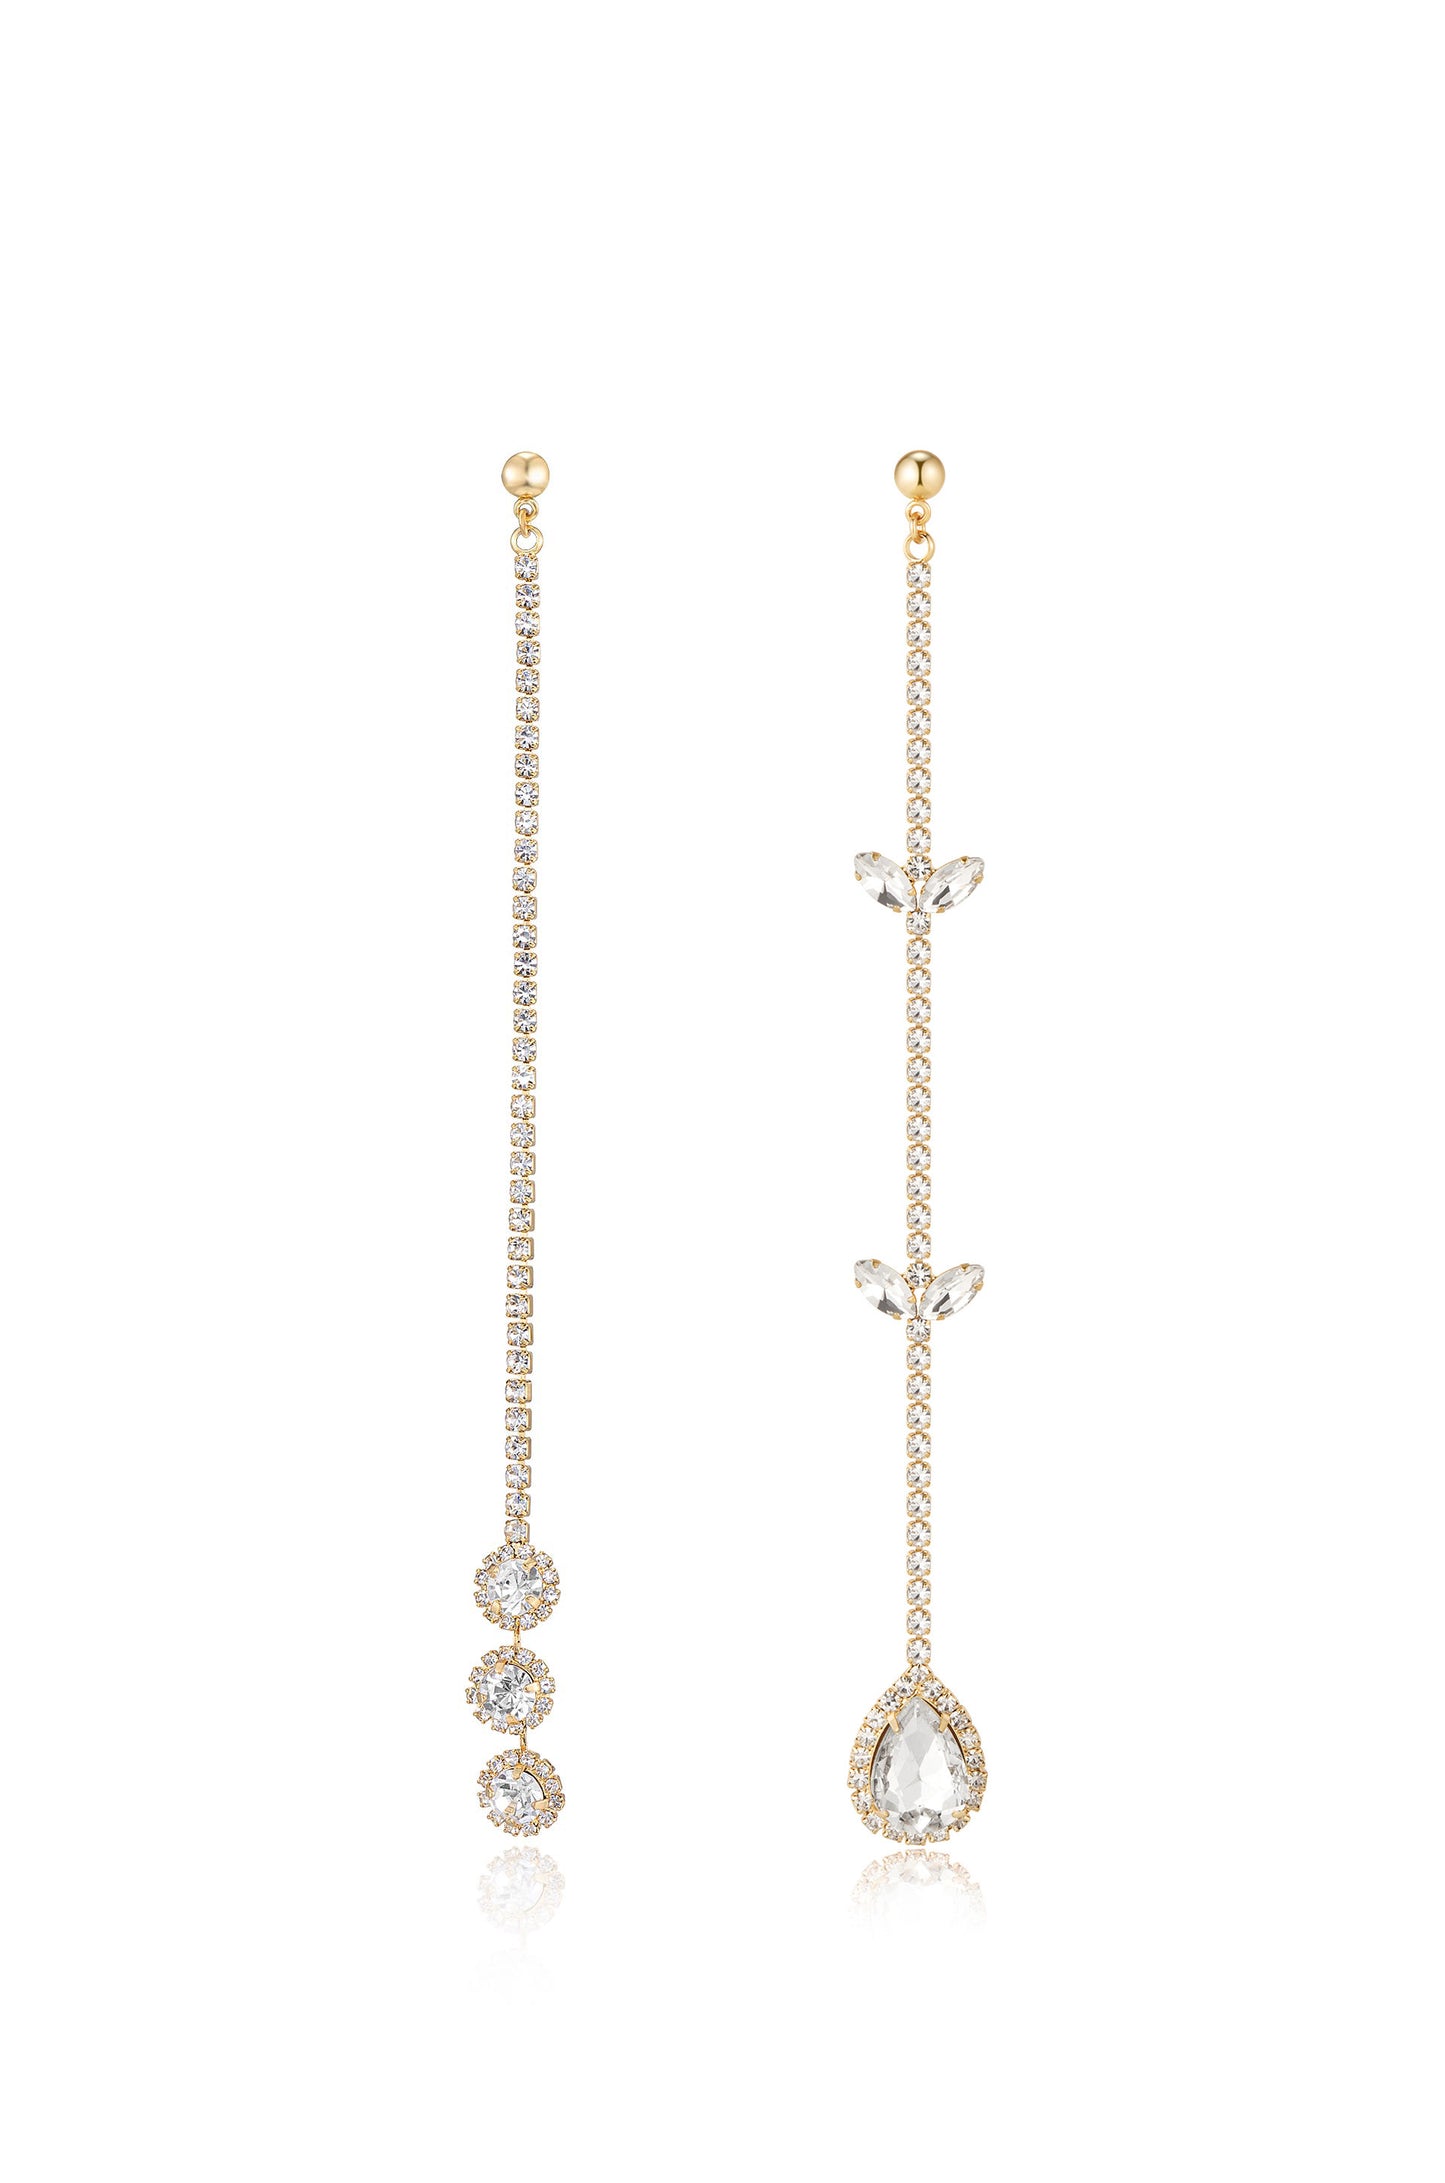 Mix It Up Crystal 18k Gold Plated Asymmetrical Earrings